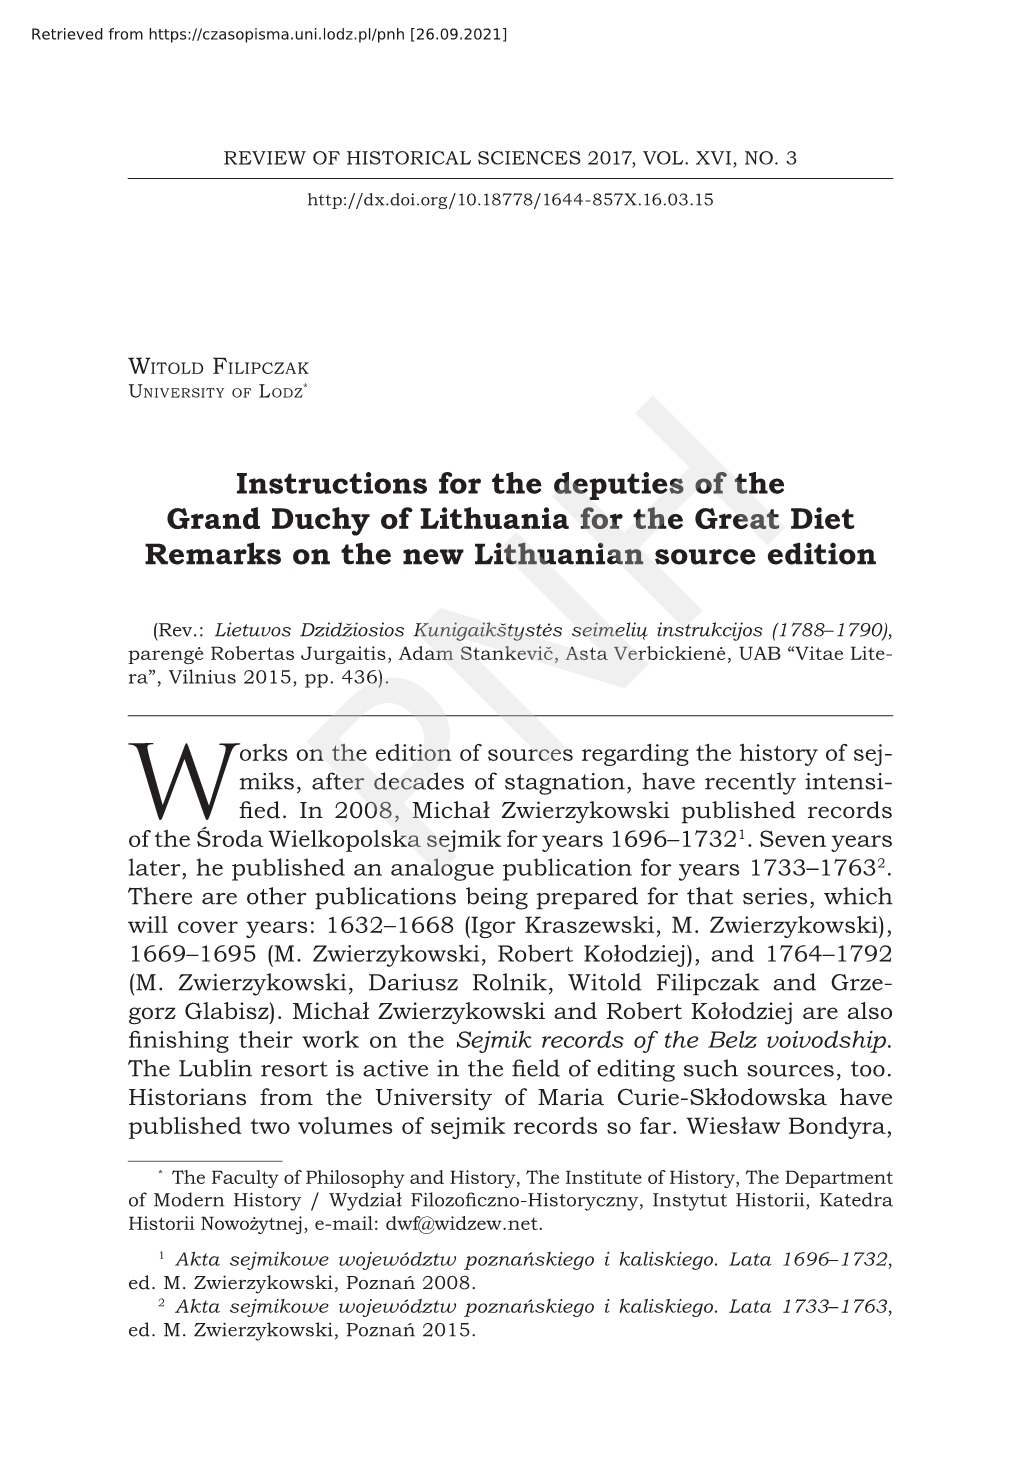 Instructions for the Deputies of the Grand Duchy of Lithuania for the Great Diet Remarks on the New Lithuanian Source Edition